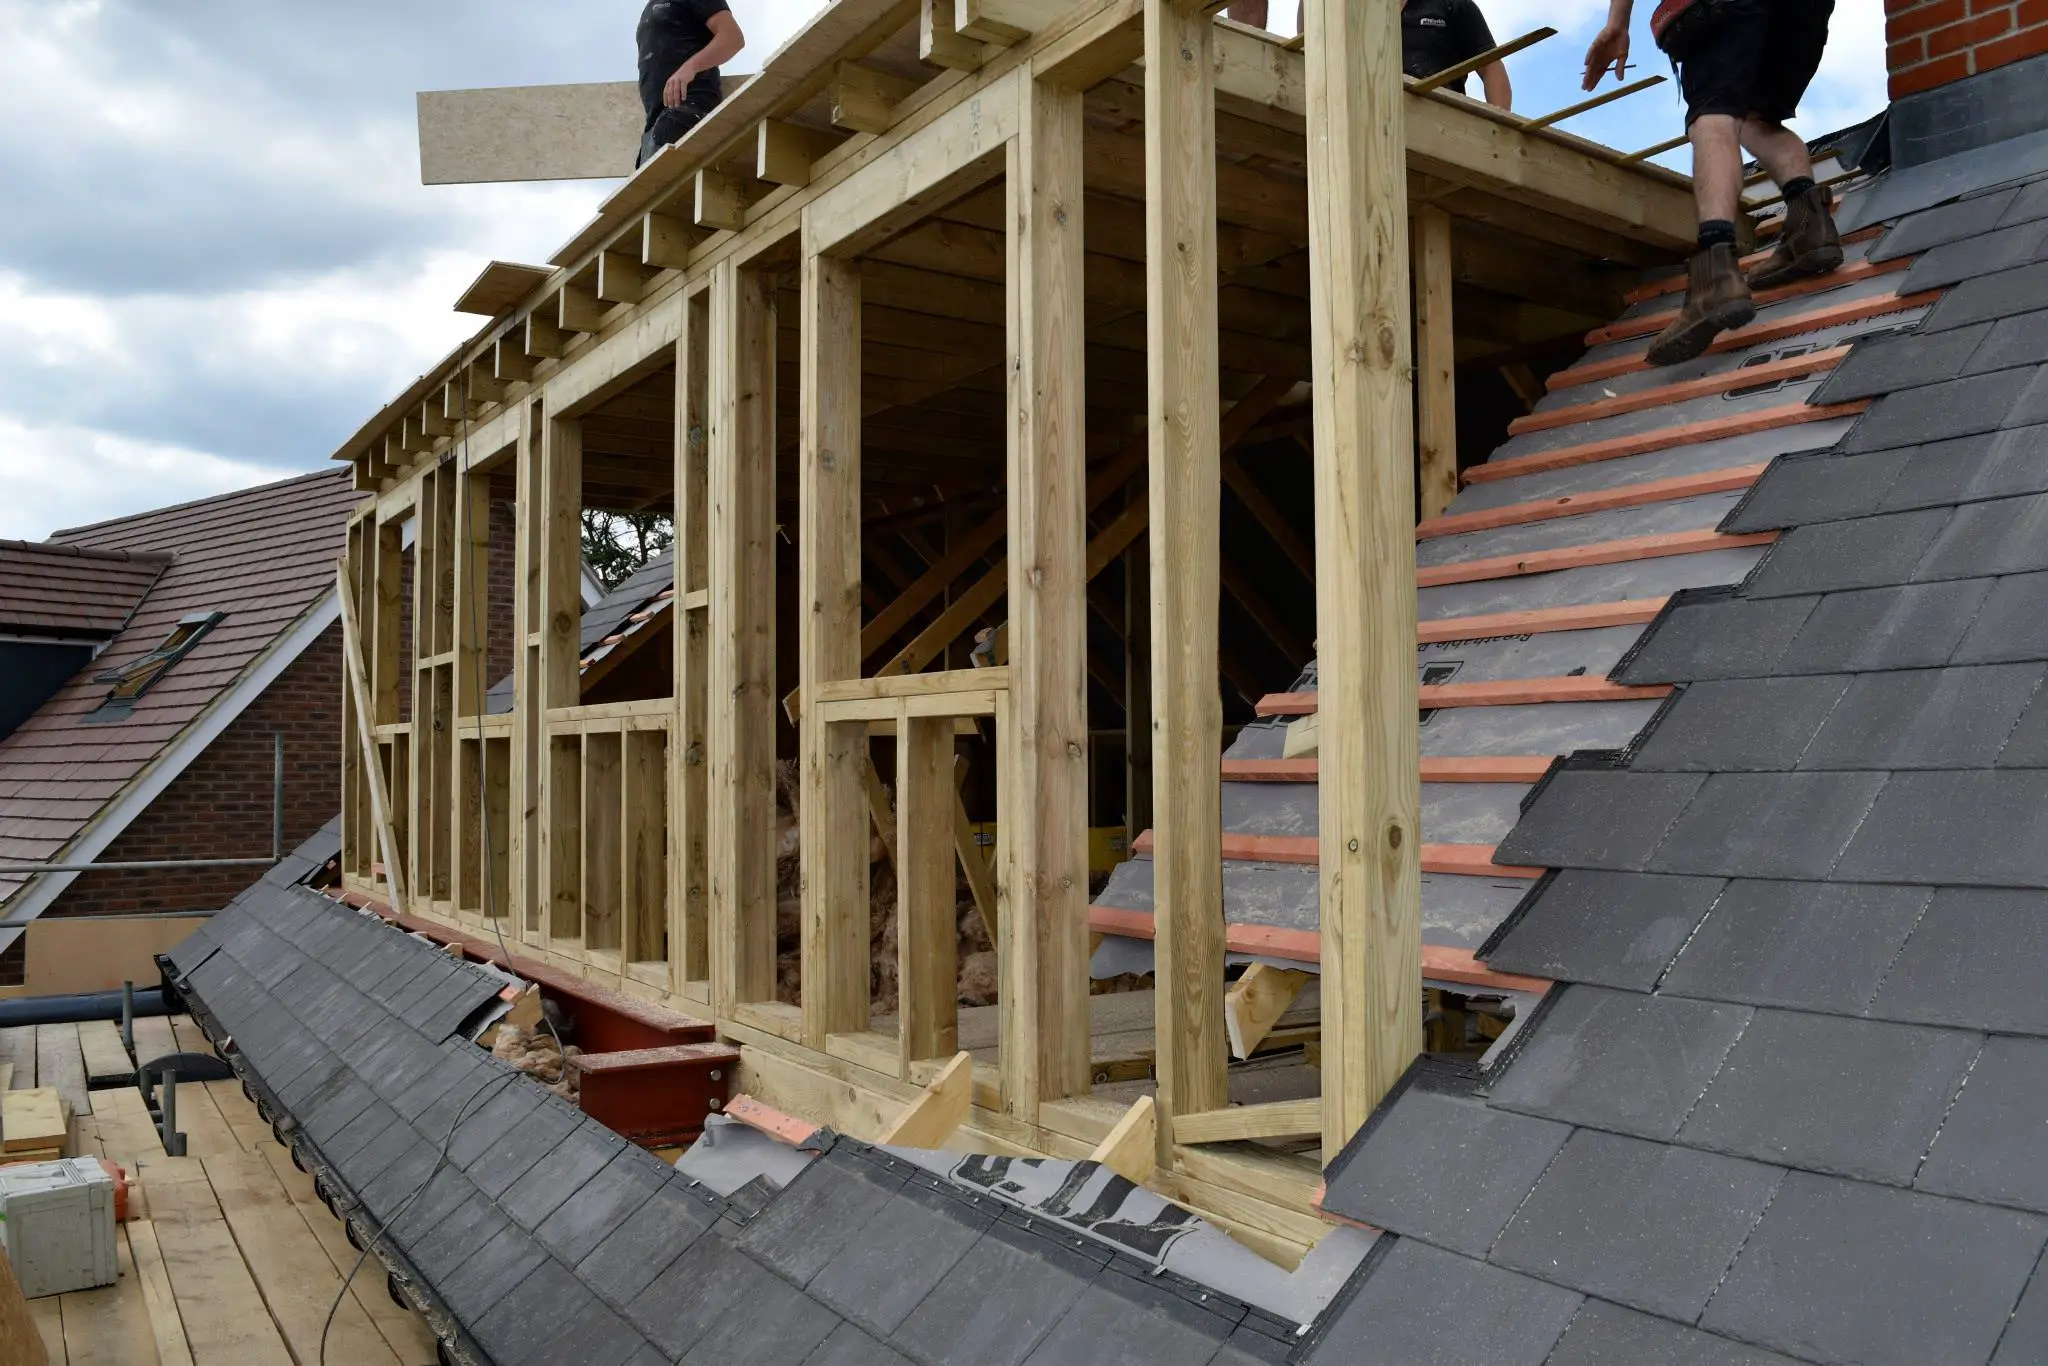 Dormer loft conversion costs, prices and processes / Roofcosts.co.uk